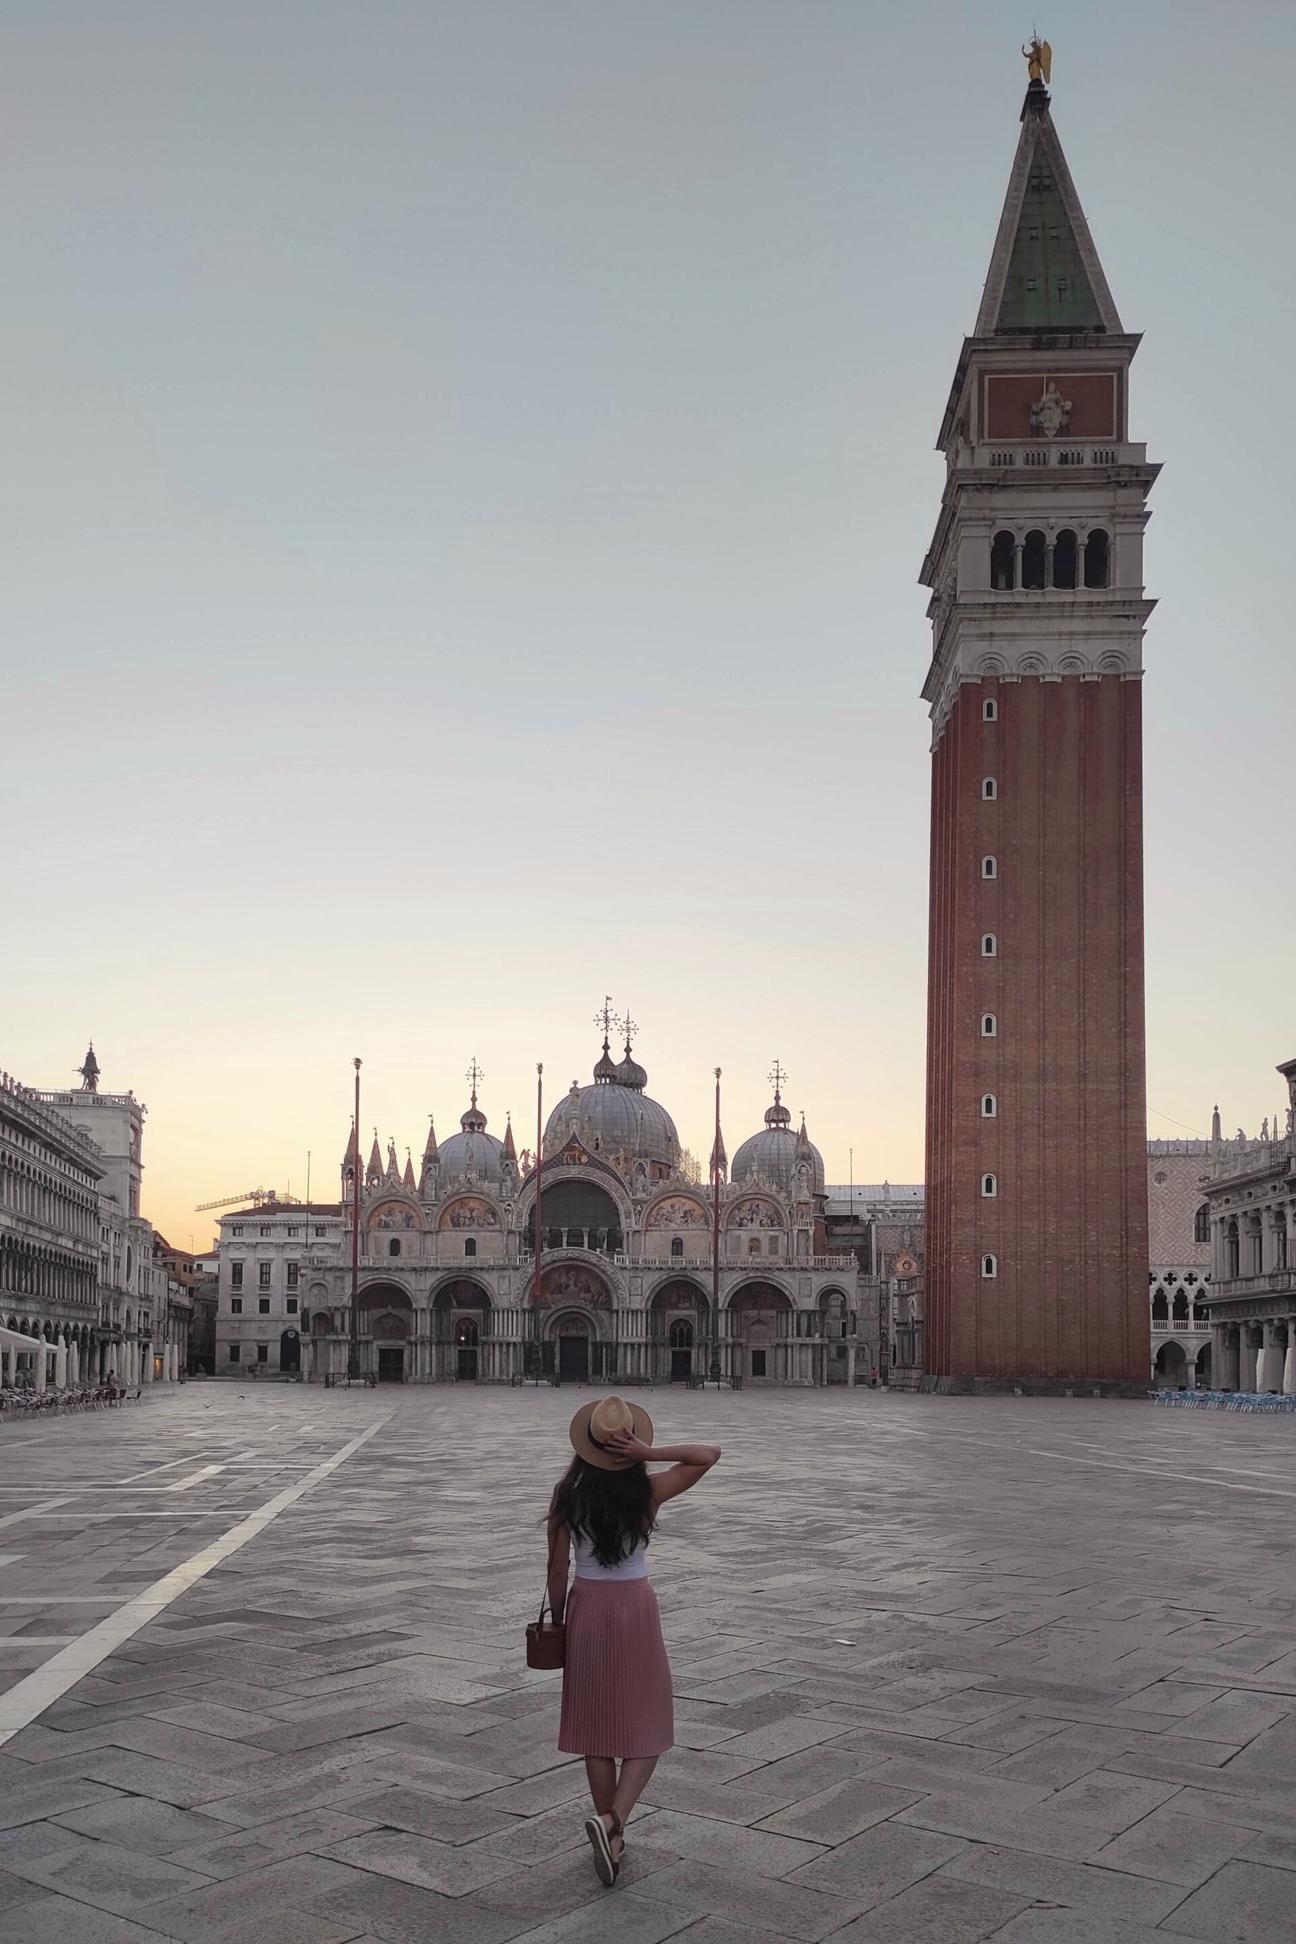 St Mark's Square (Piazza S. Marco)